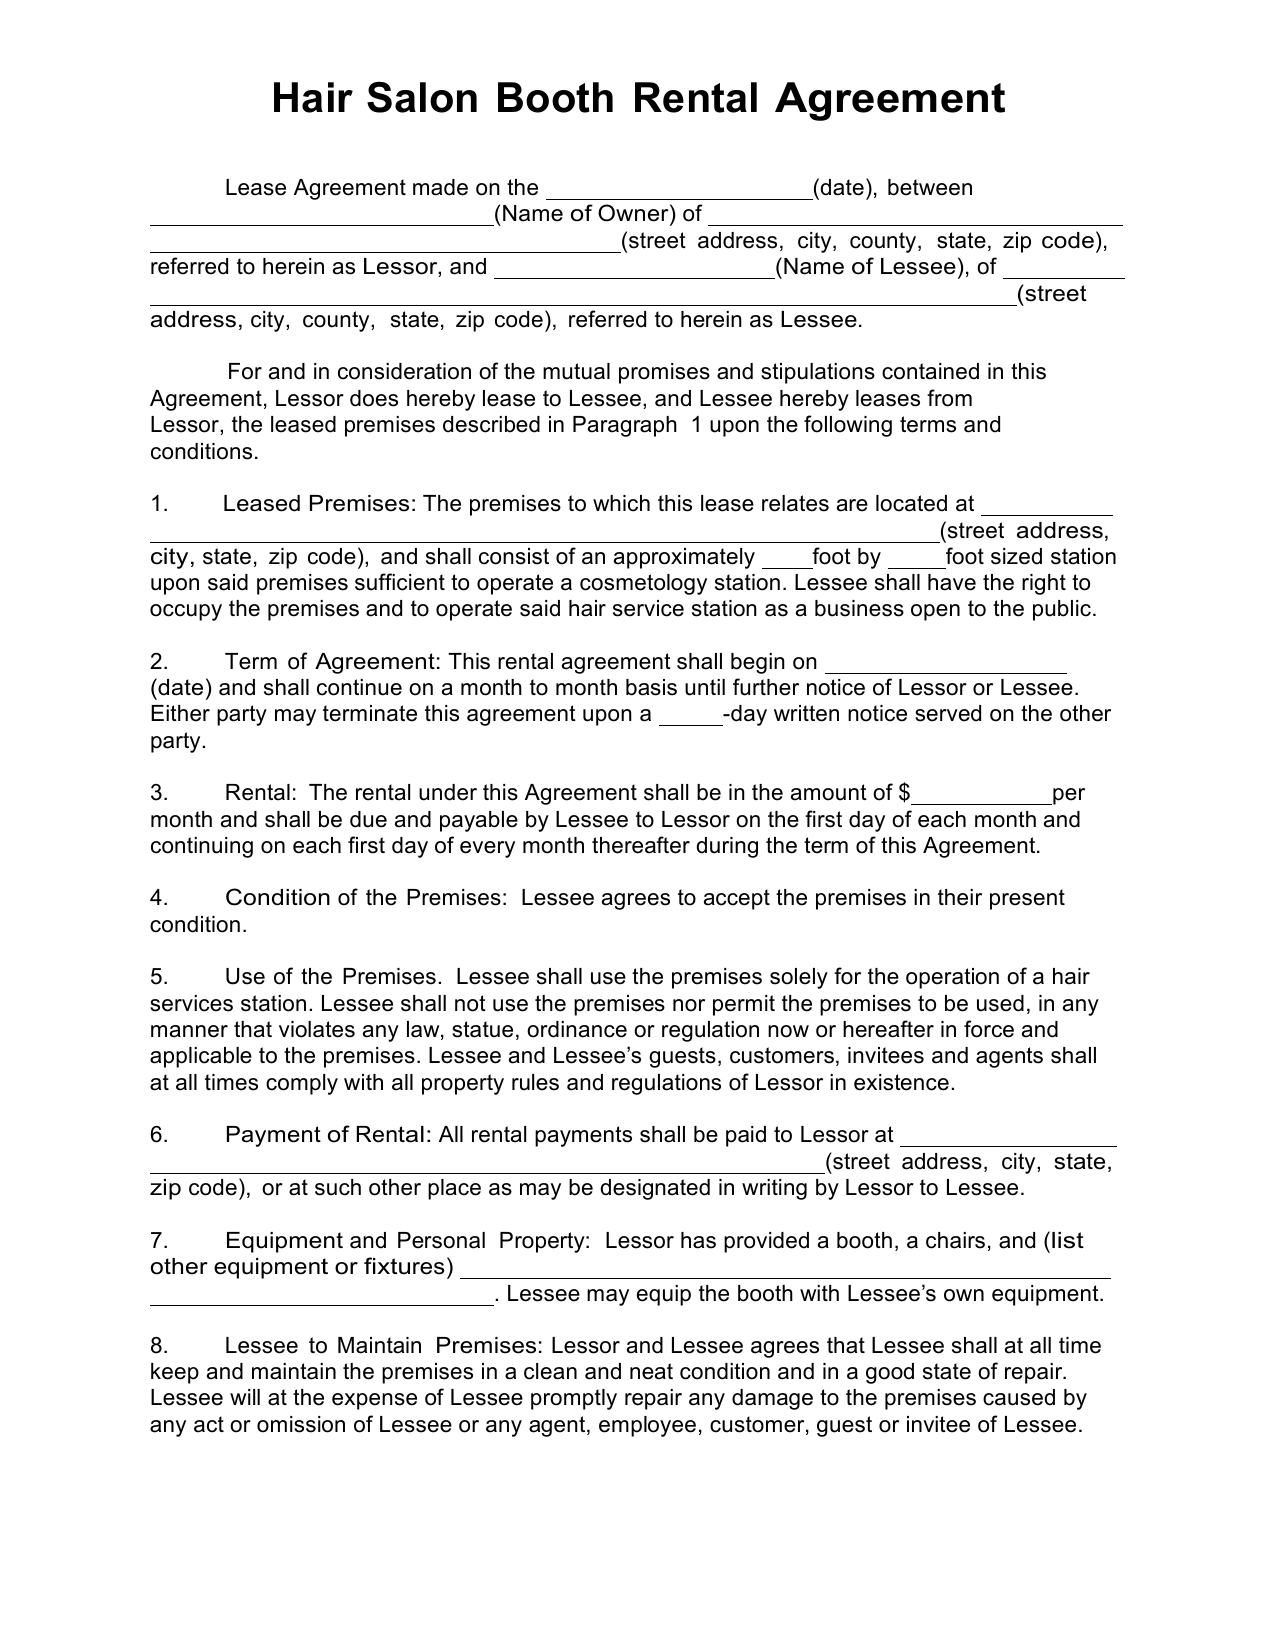 Rental Agreement Contract Download Salon Booth Rental Lease Agreement Template Pdf Rtf